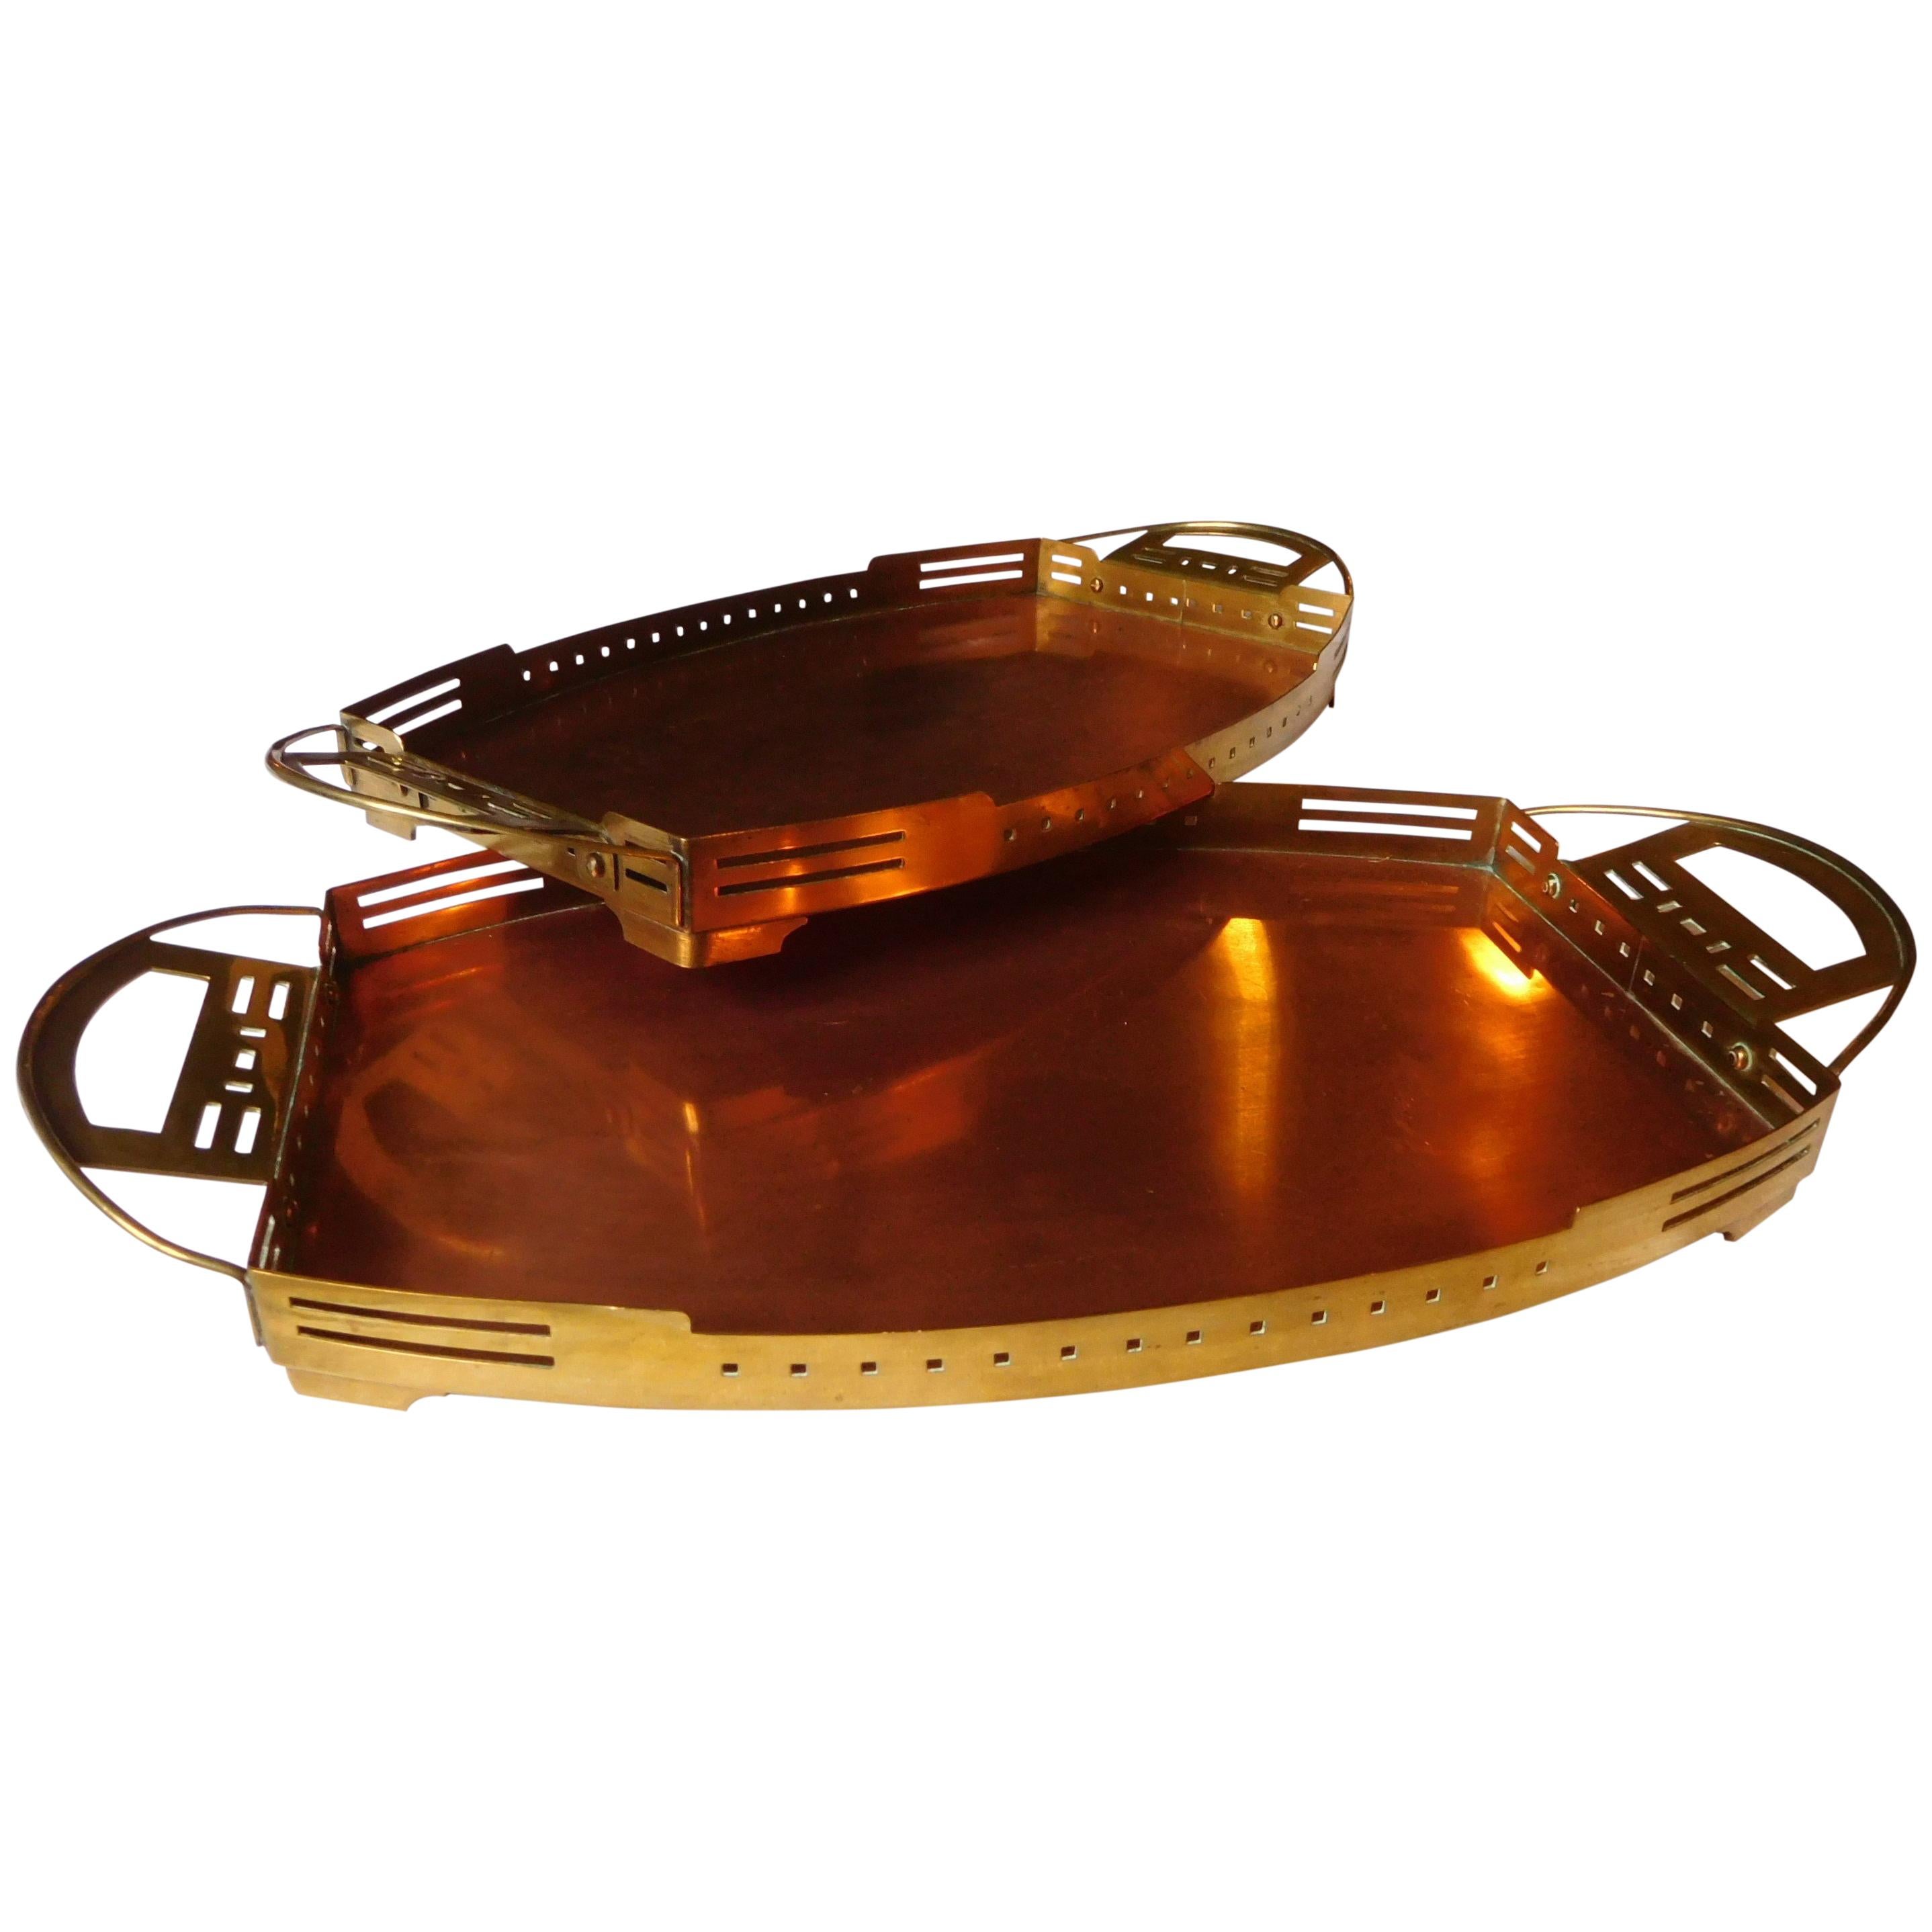 ART NOUVEAU Serving-Tray  Gustave Serrurier-Bovy  Two  For Sale